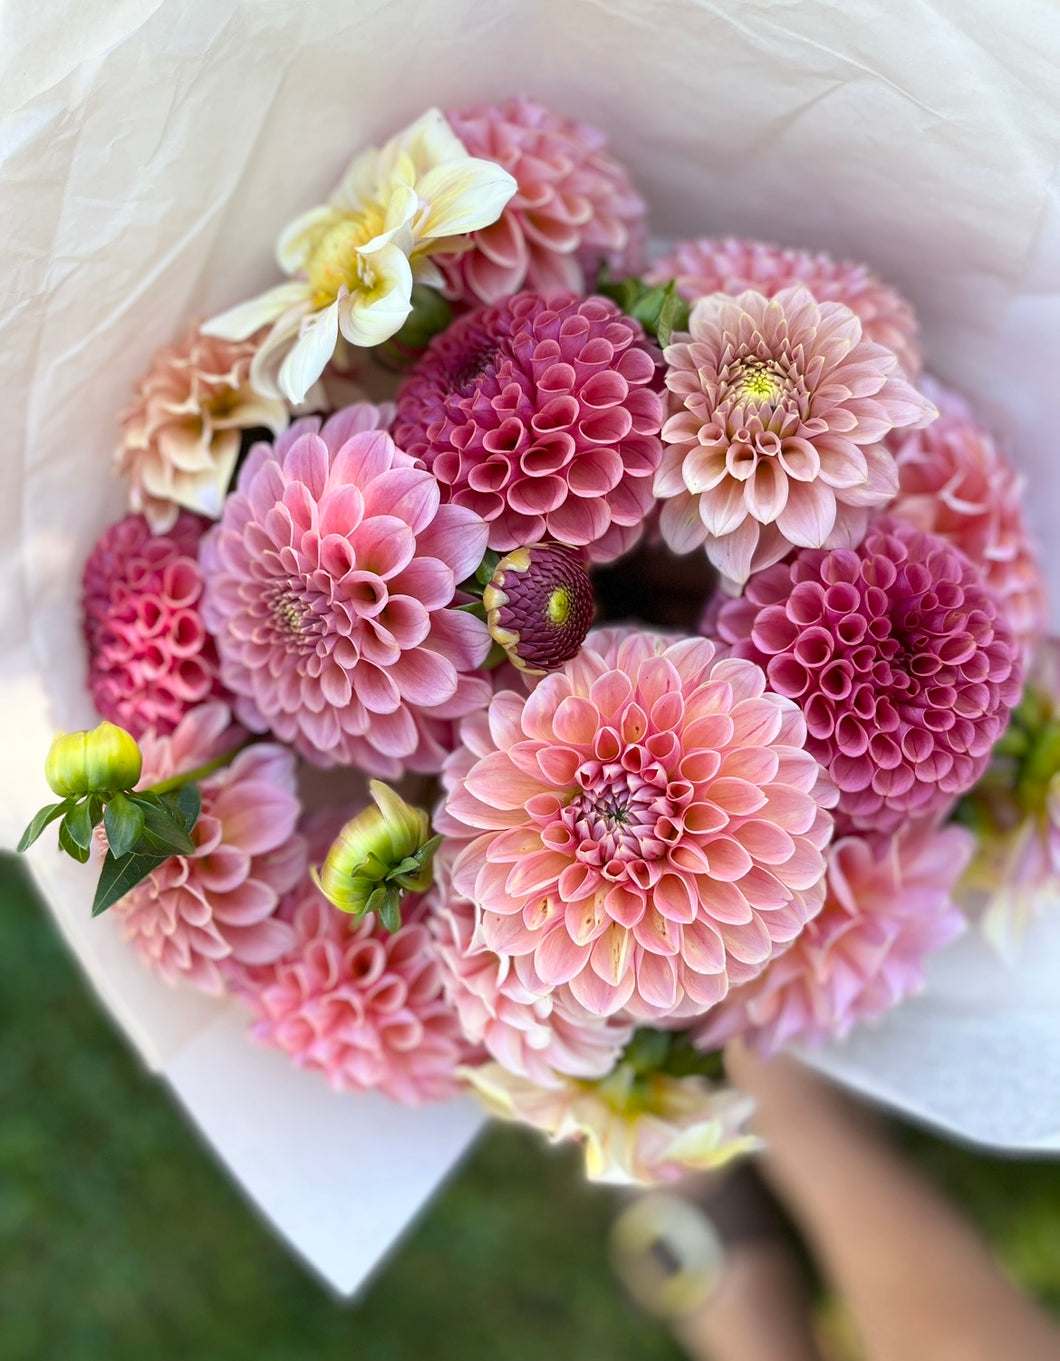 September Dahlia Subscription - Three Weeks of Dahlias in September (Pickup from the farm)